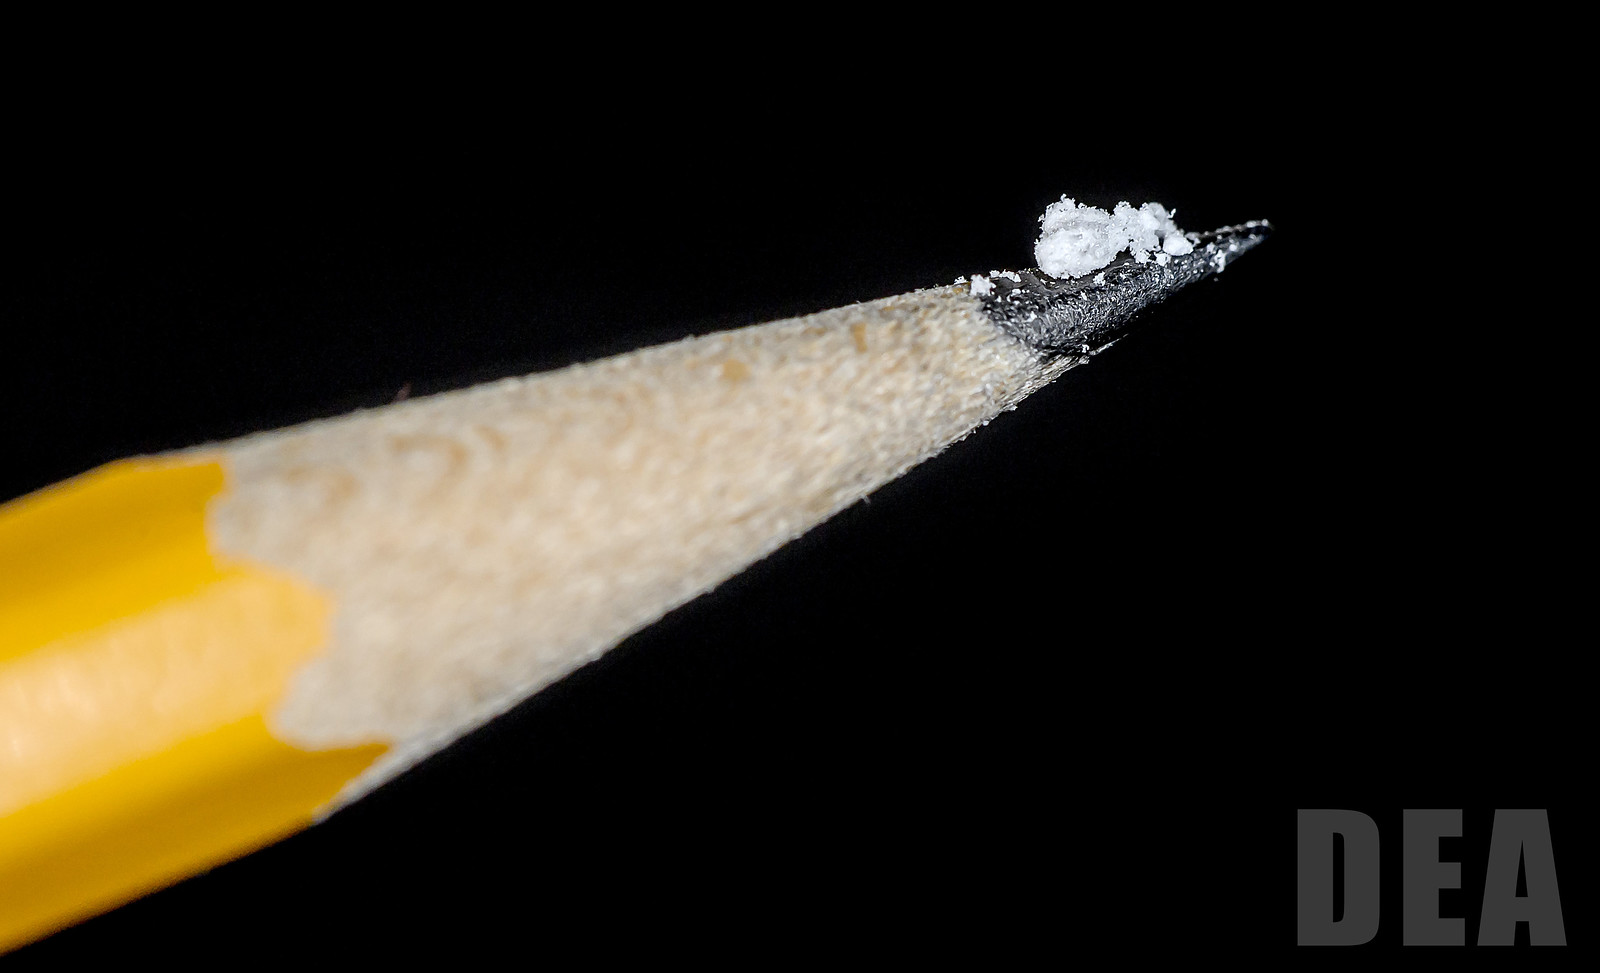 Two milligrams of white powder on the tip of a pencil.